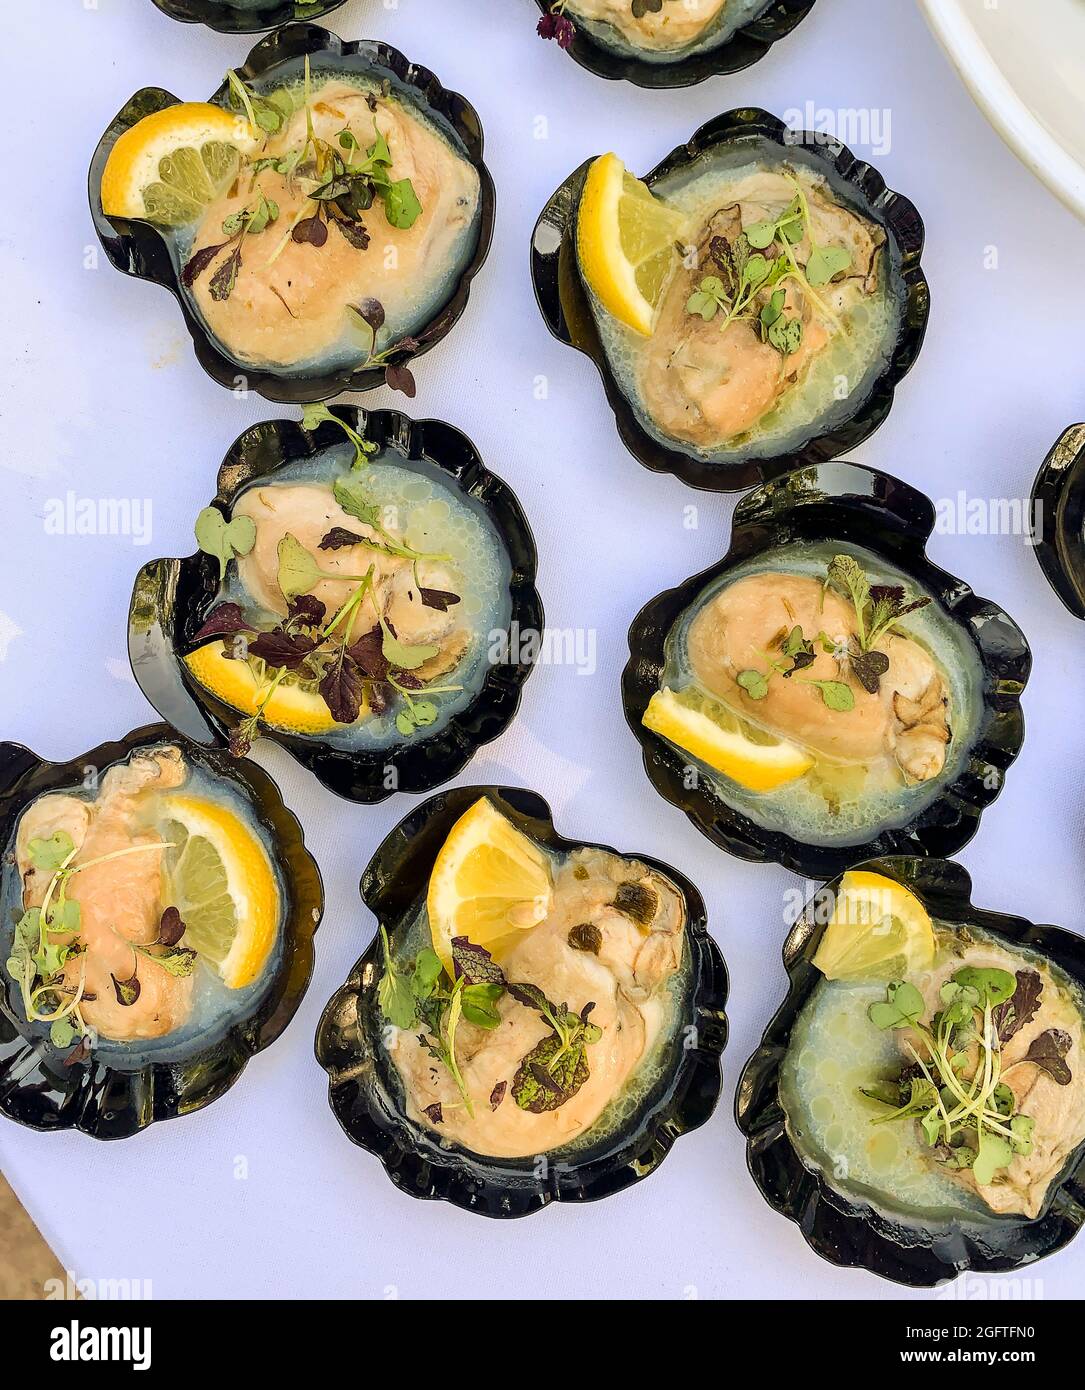 https://c8.alamy.com/comp/2GFTFN0/smoked-oysters-with-lemon-butter-hors-doeuvres-2GFTFN0.jpg